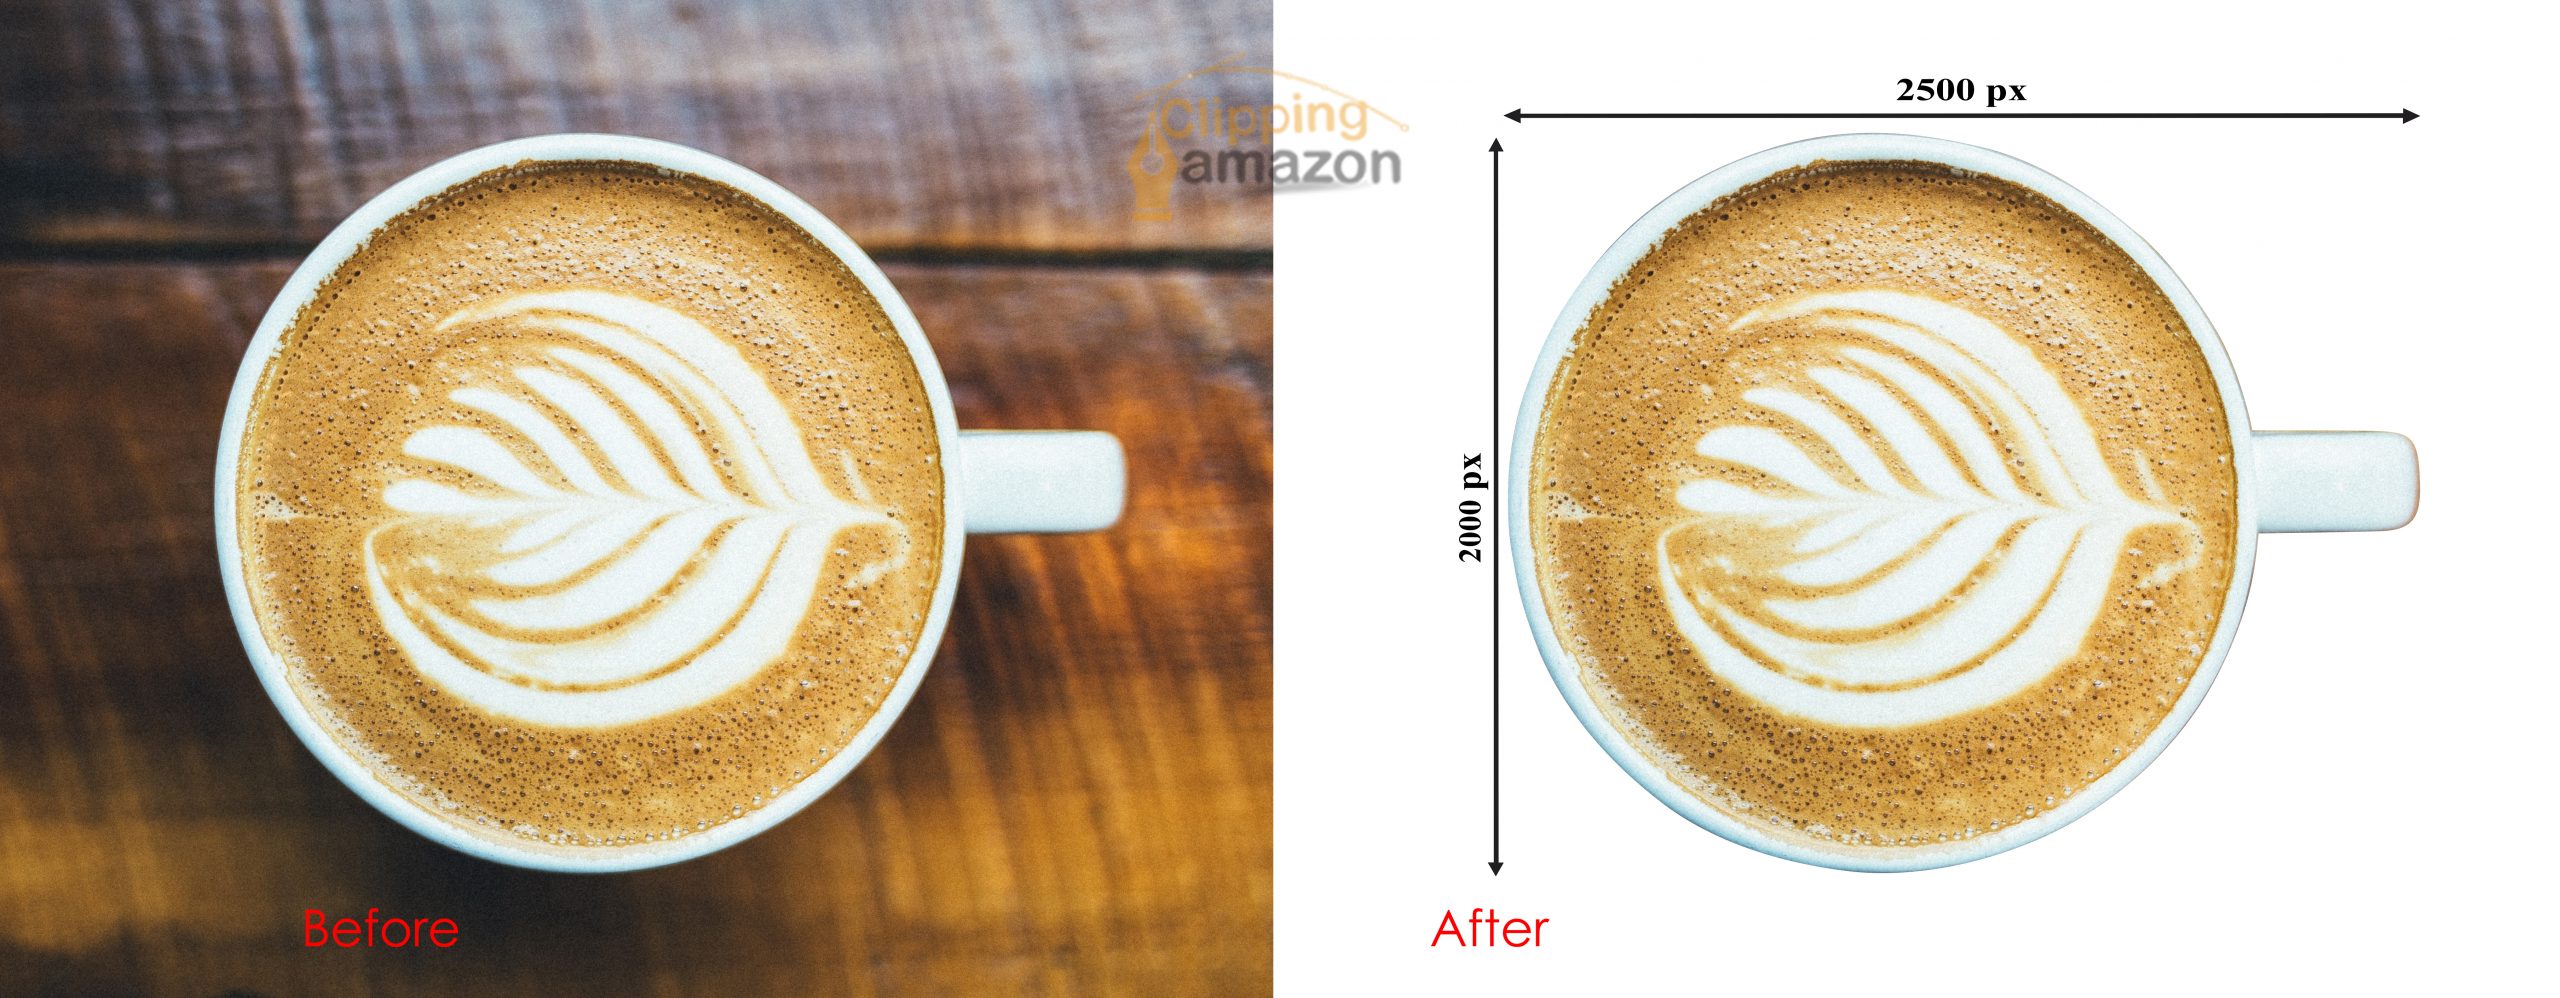 How Do Image Cropping And Resizing Services Are work For E-commerce Businesses?